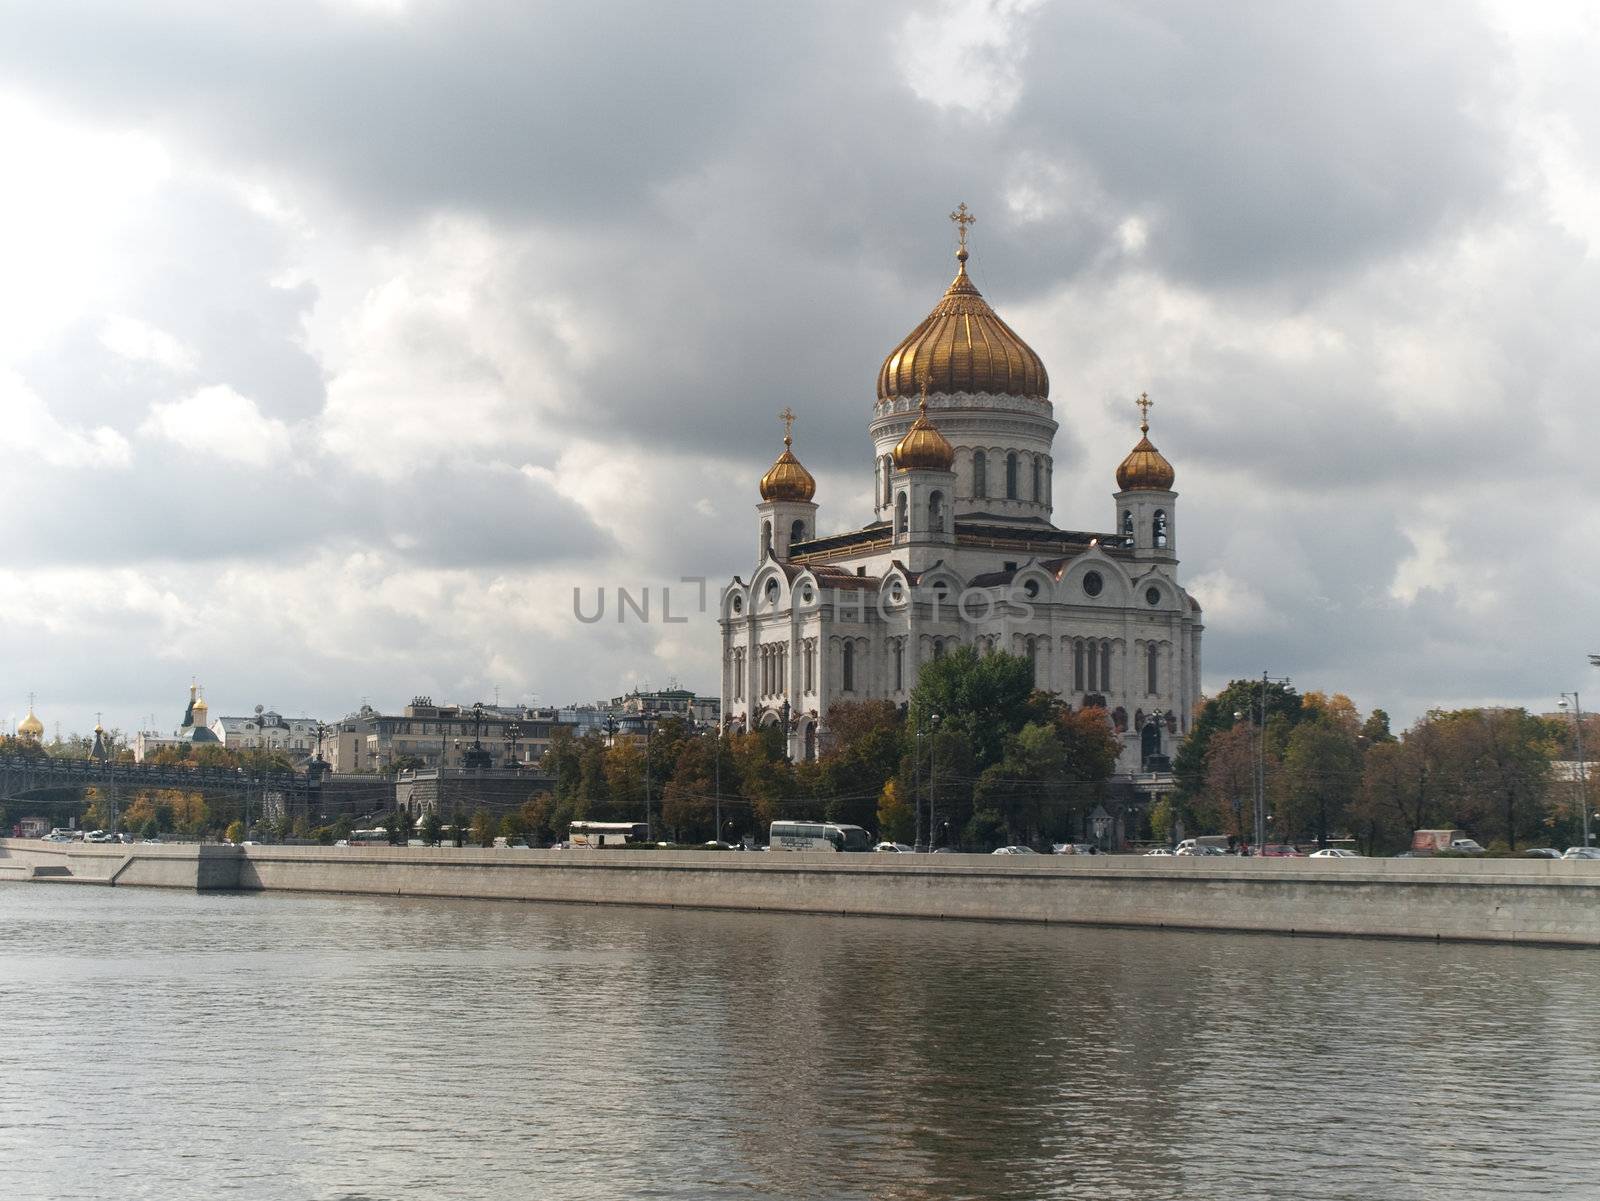 Orthodox Church of Christ the Redeemer in Moscow Russia, viewed from across the river